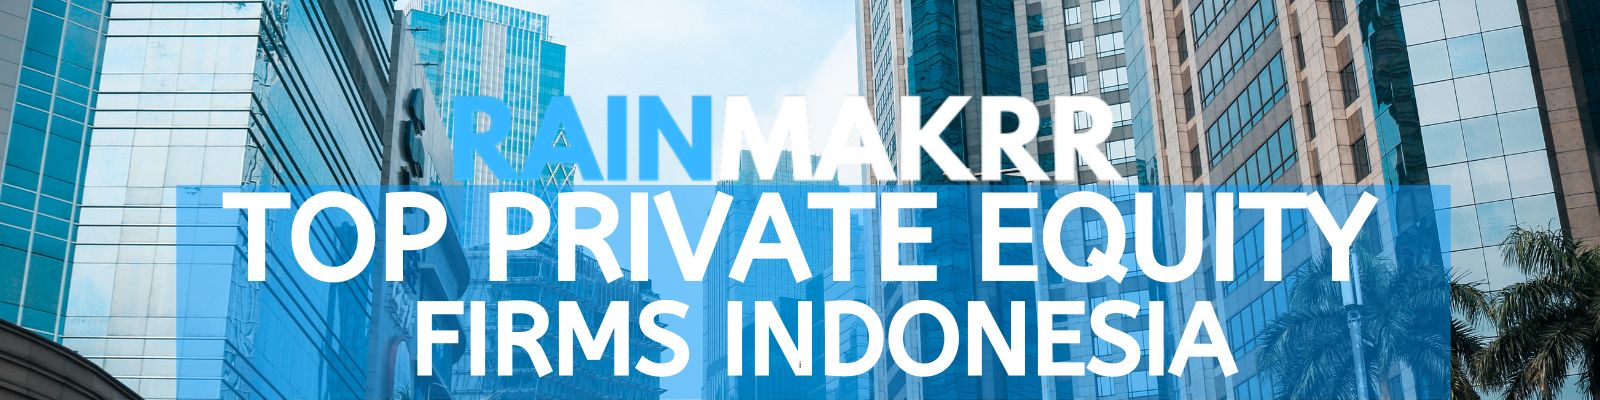 private equity indonesia private equity top private equity firms in indonesia private equity in indonesia private equity firm indonesia top private equity firms indonesia